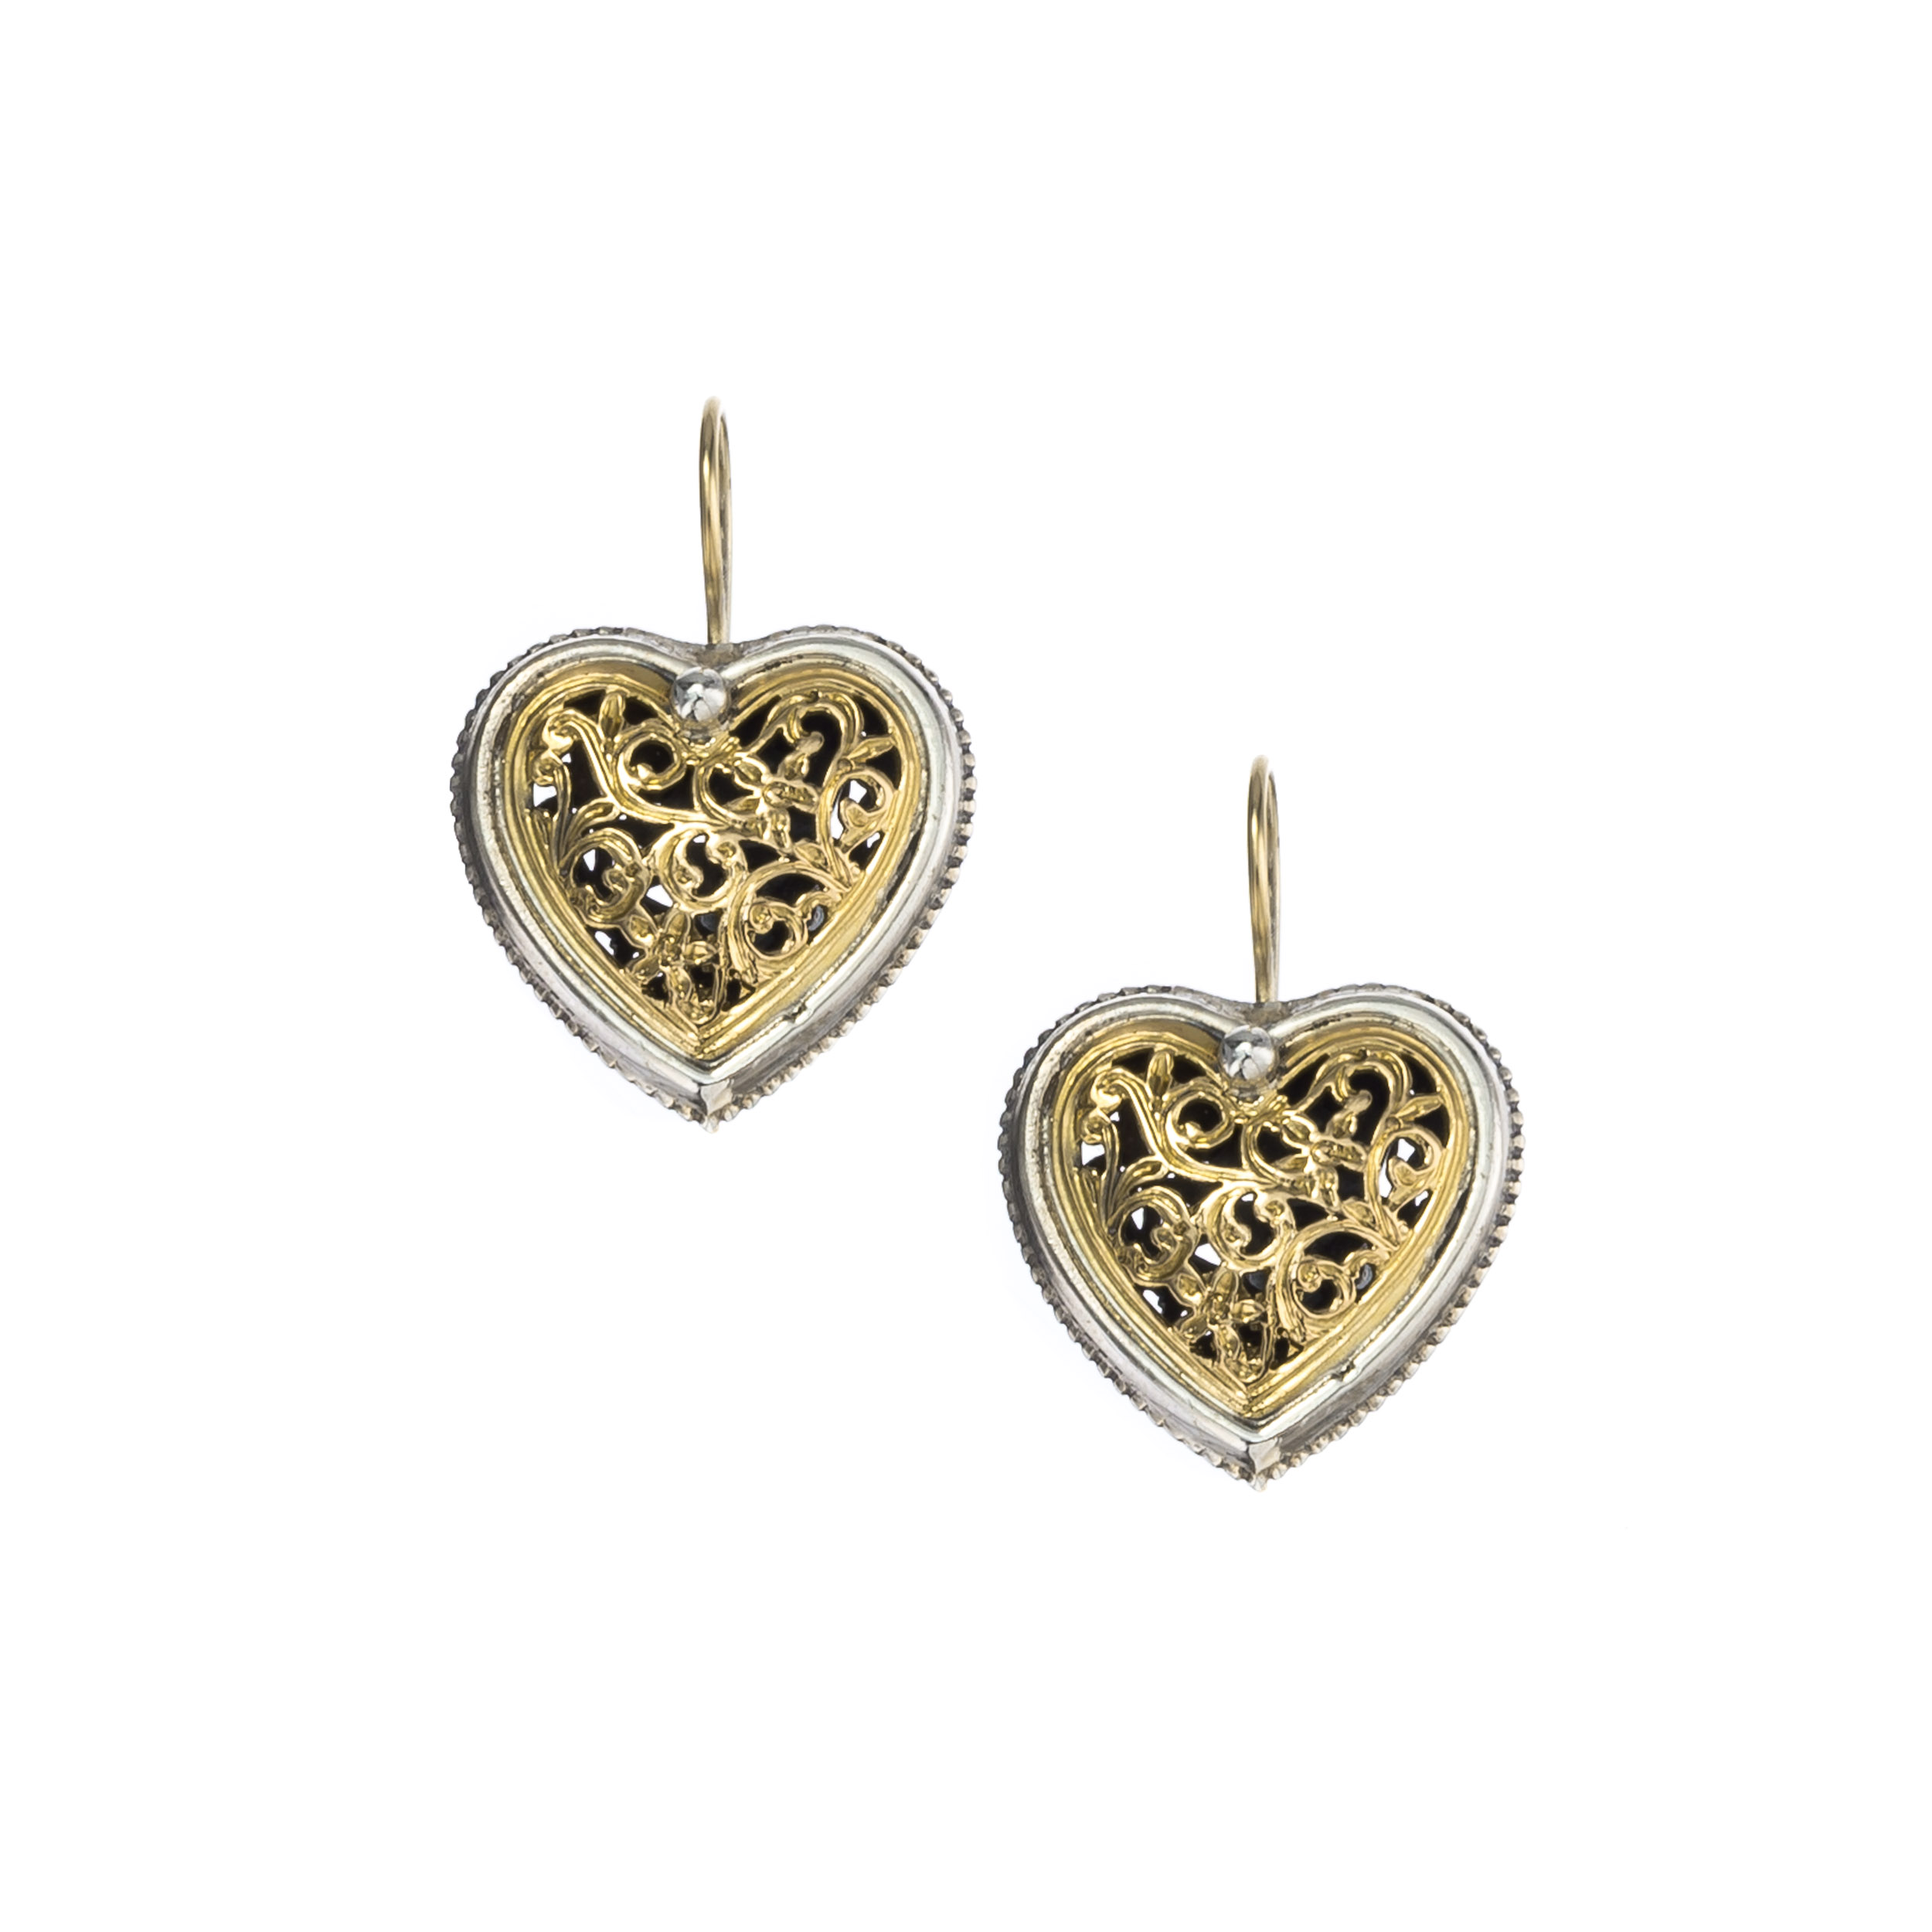 Garden Shadows Hearts Earrings in 18K Gold and Sterling Silver